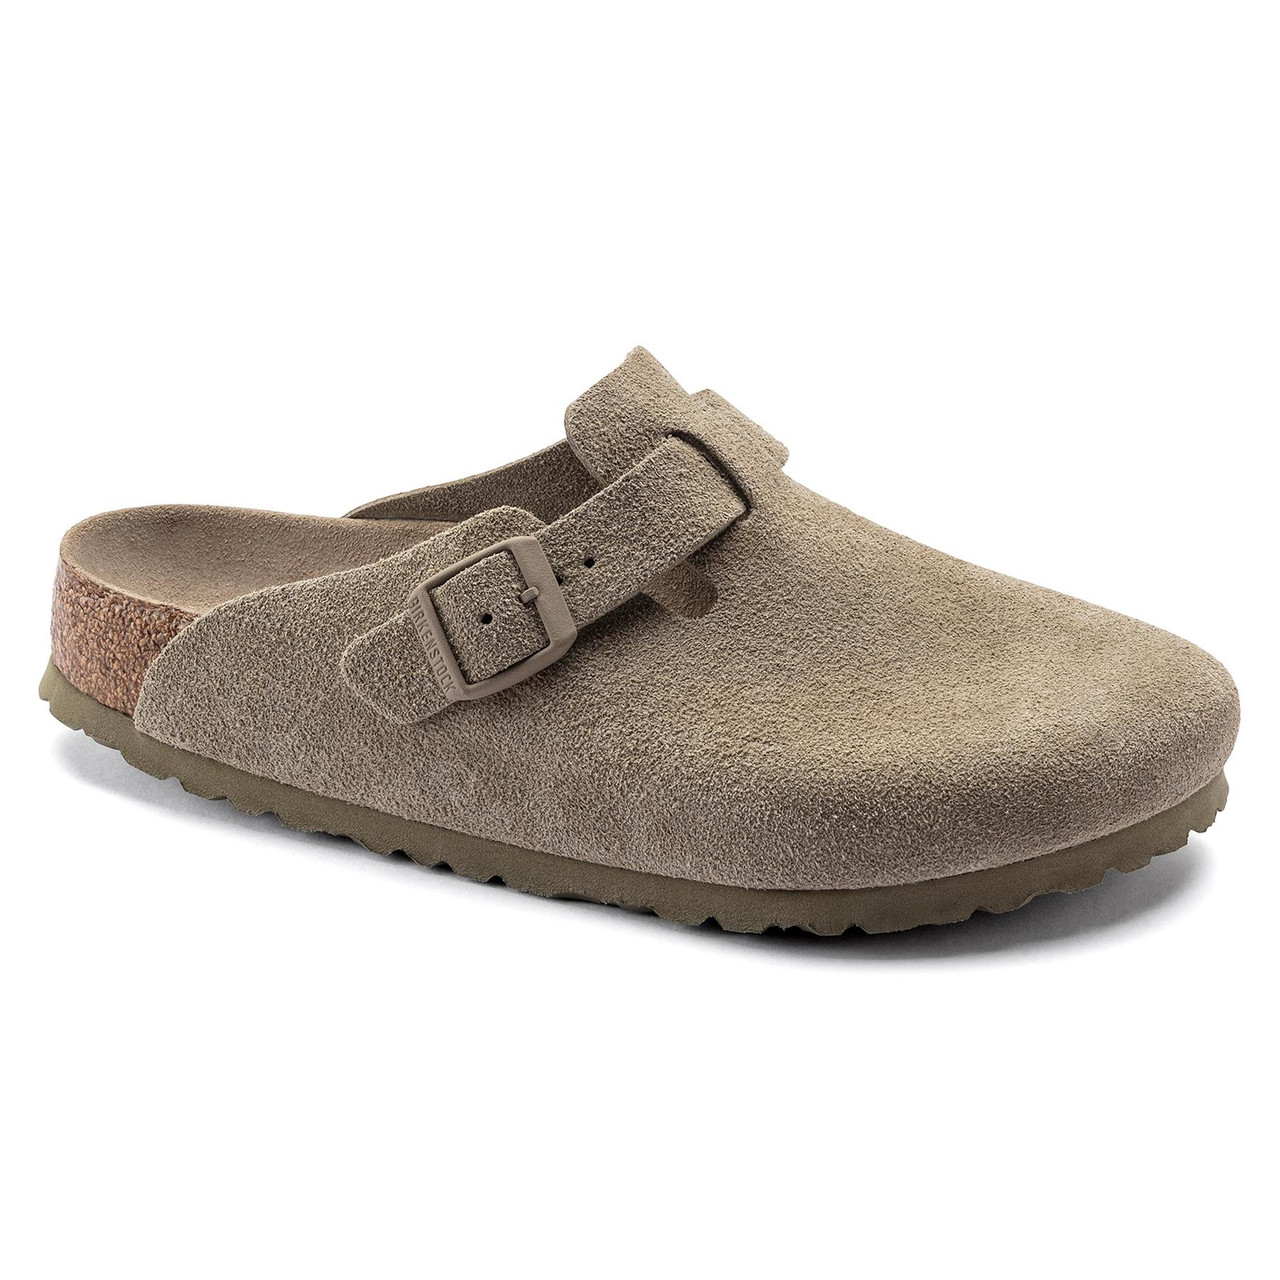 What kind of fastening does the Birkenstock Boston Soft Footbed Suede Leather Clog feature?